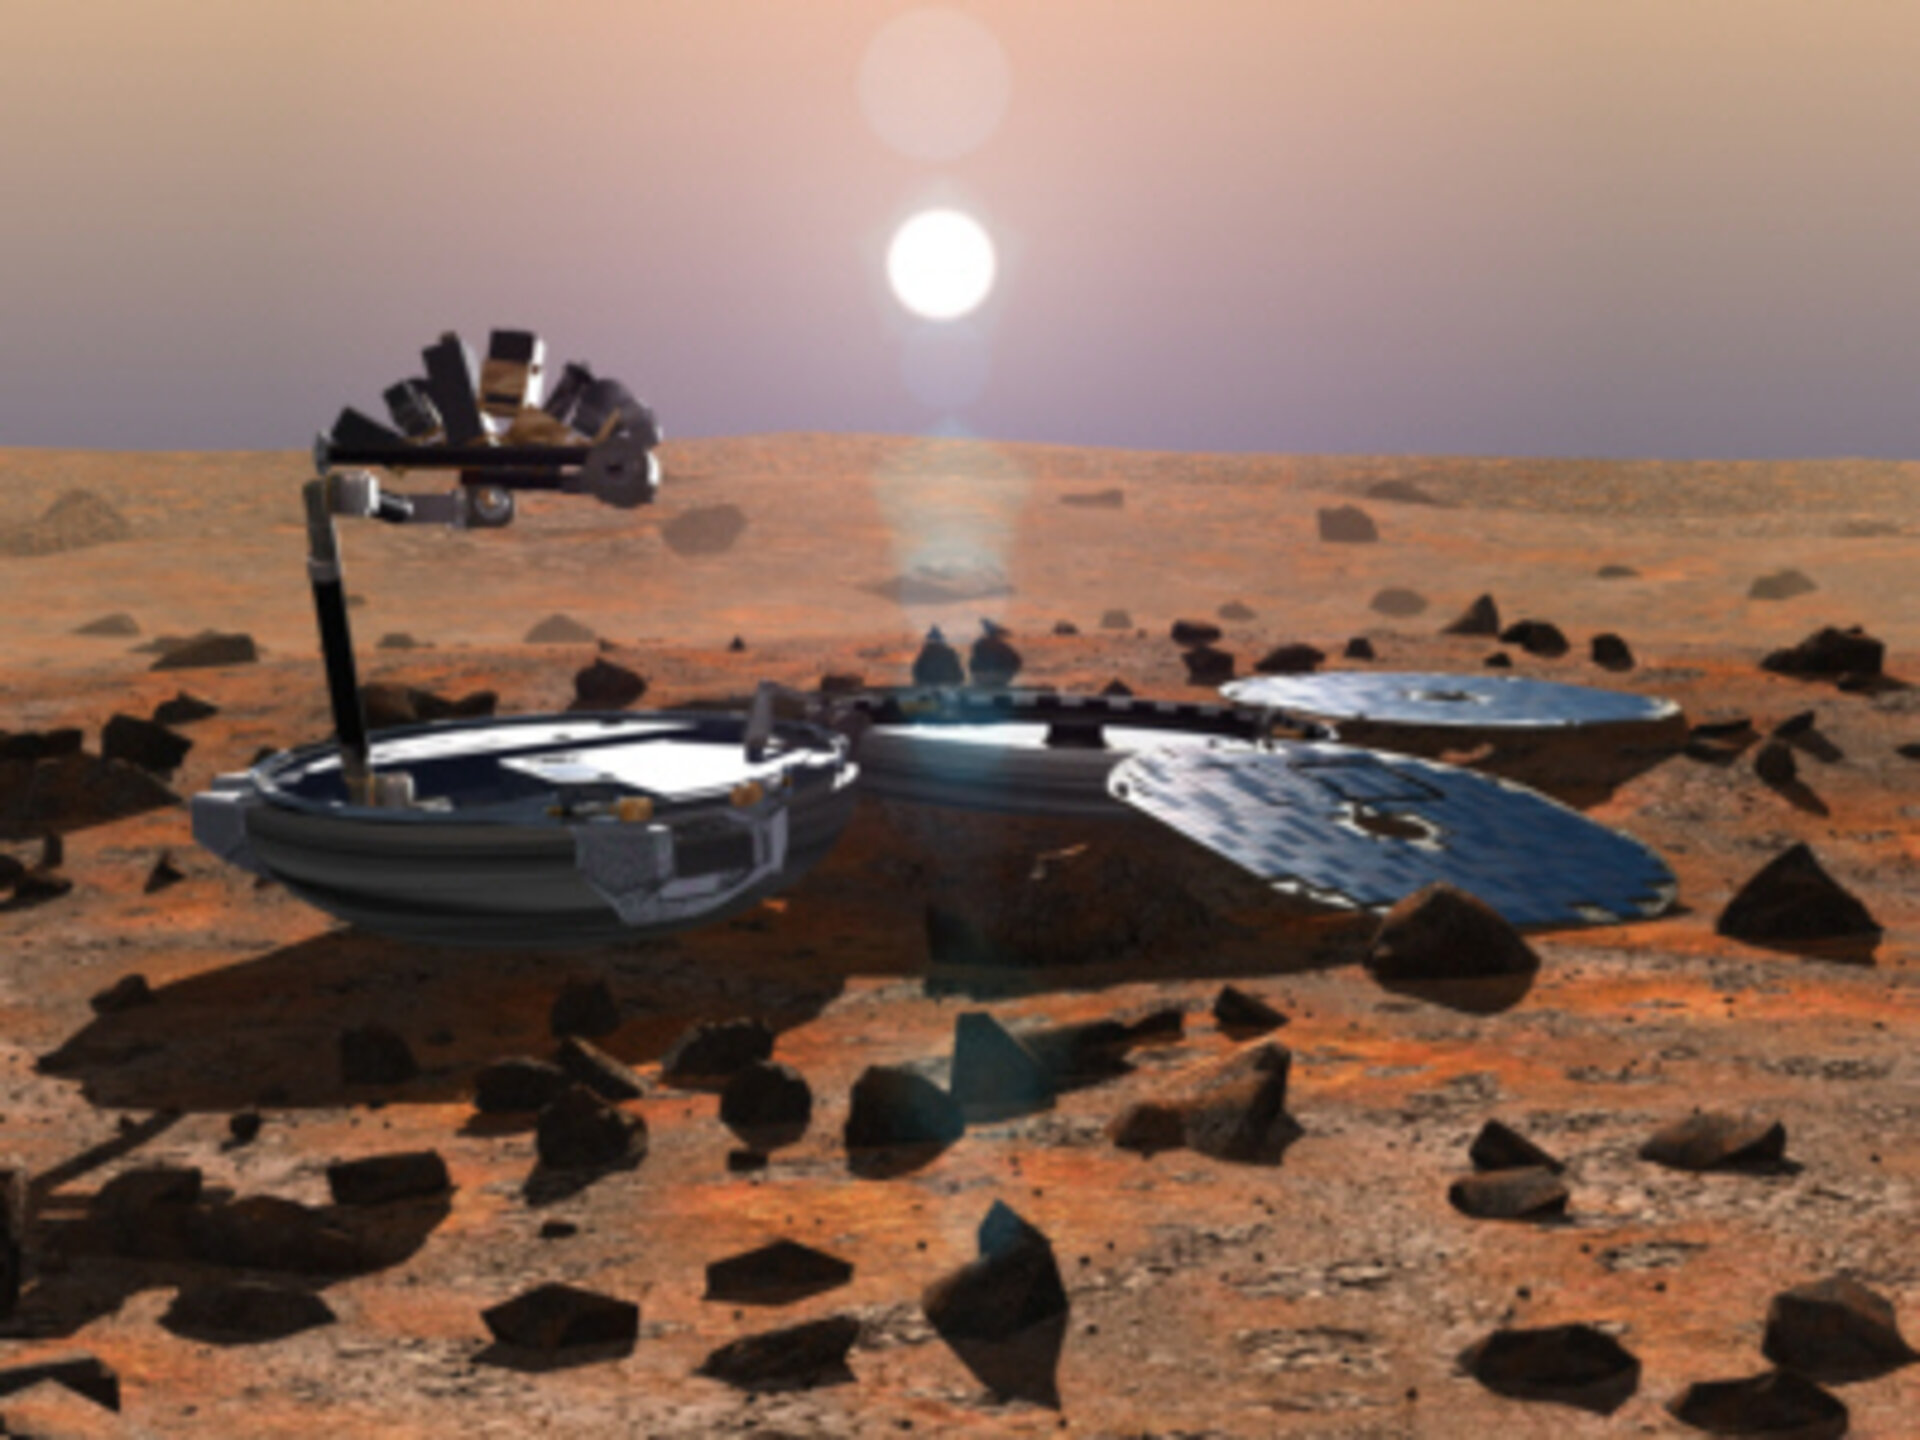 Artist's impression of Beagle 2 on Martian surface